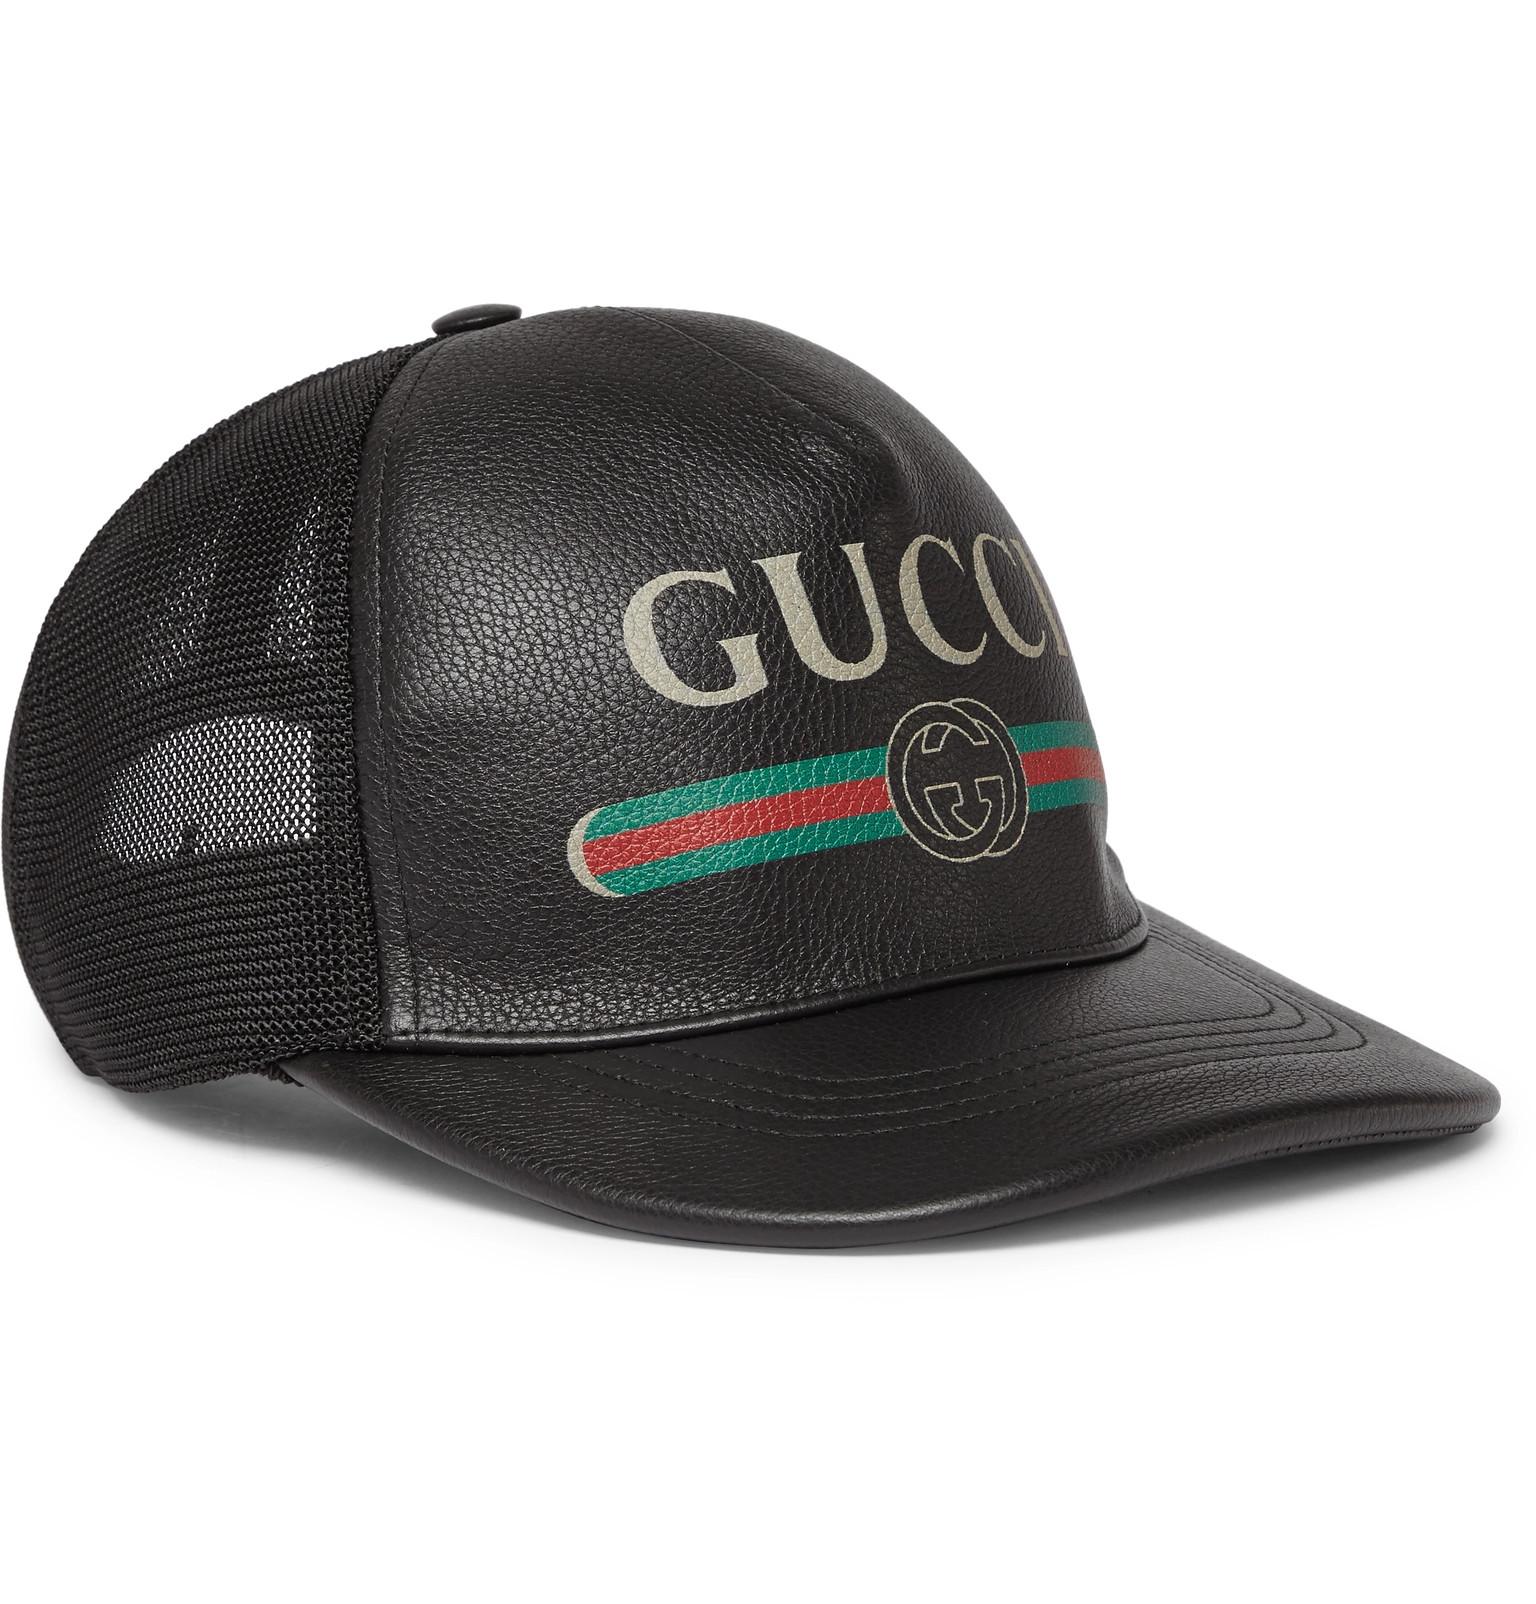 Gucci Fake Logo Leather Cap in White Black Pink (Black) for Men - Lyst